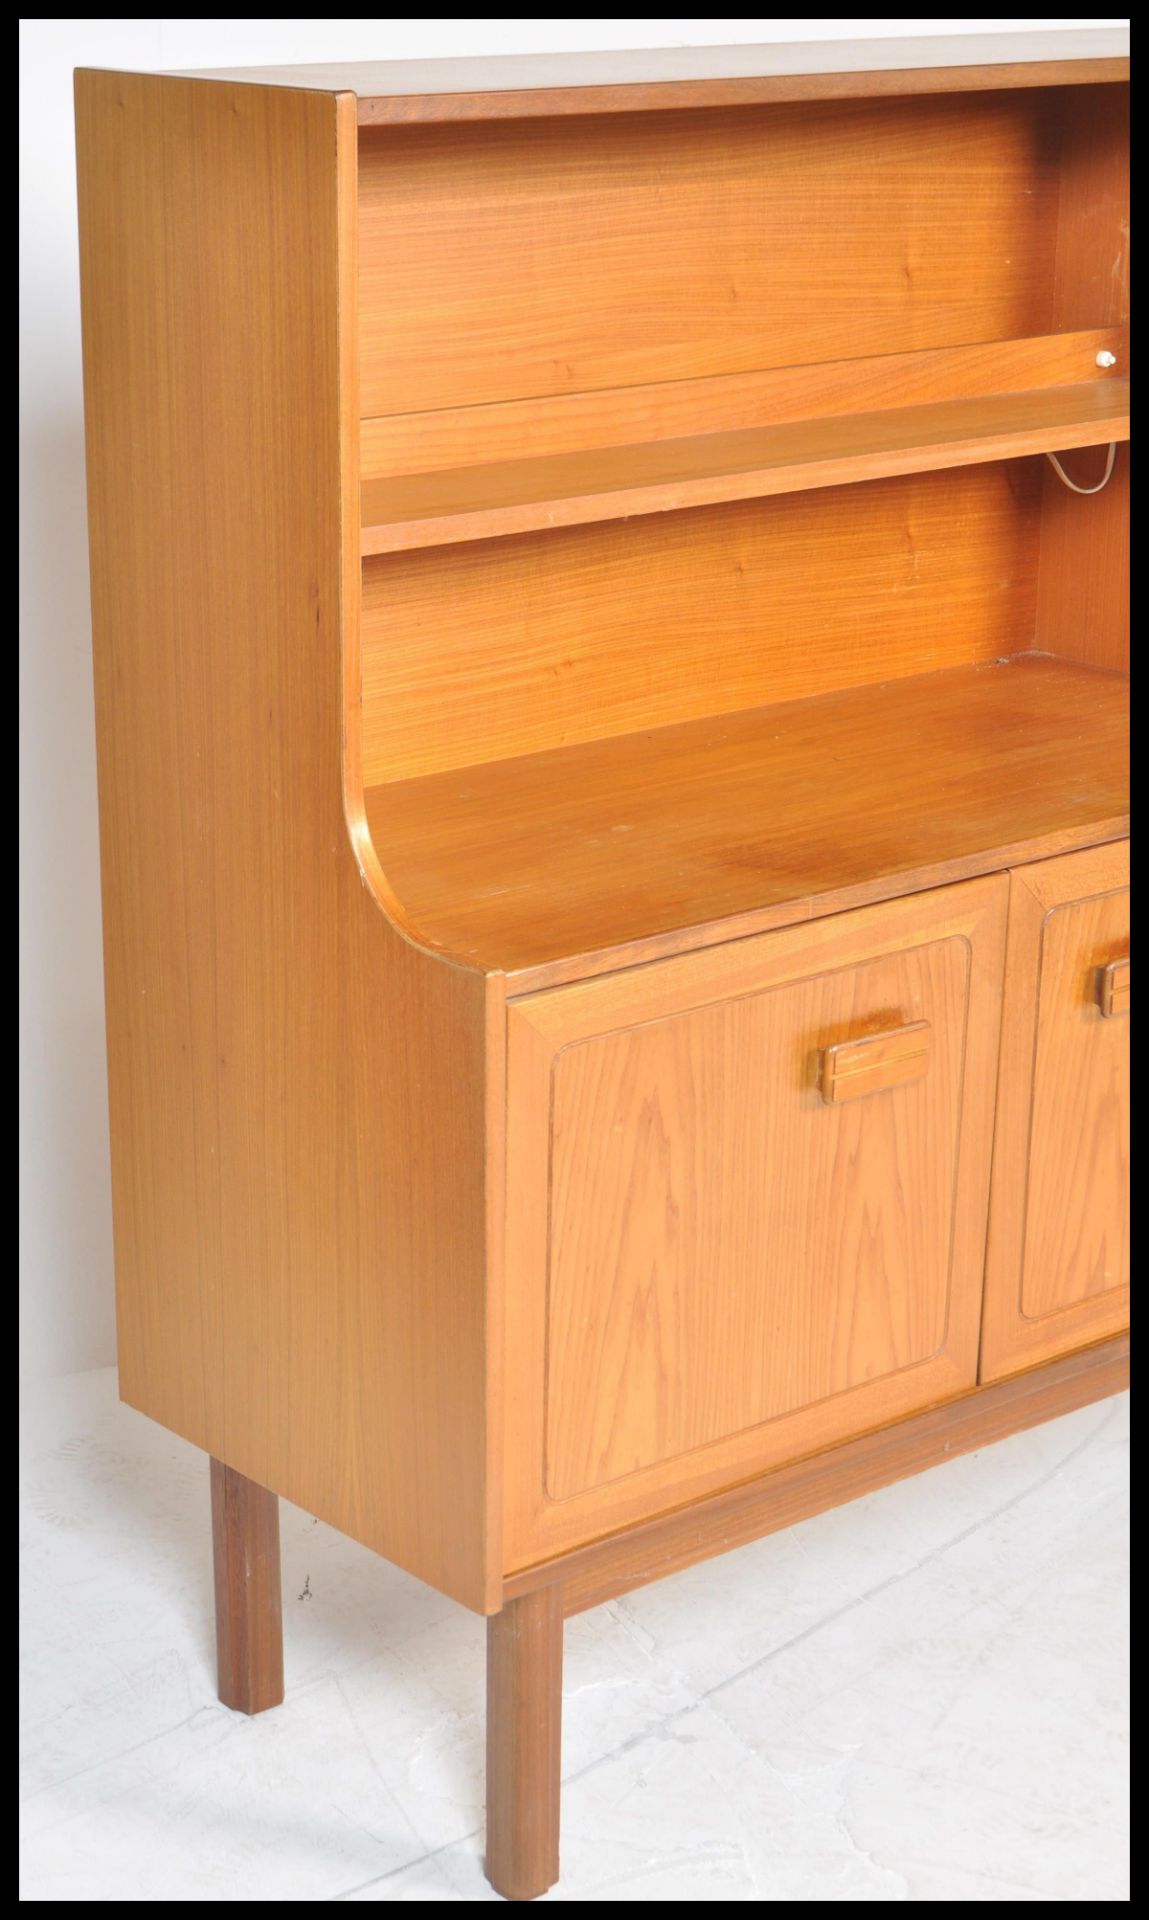 A retro 20th Century teak wood highboard sideboard credenza by Alfred Cox having an arrangement of - Image 3 of 6